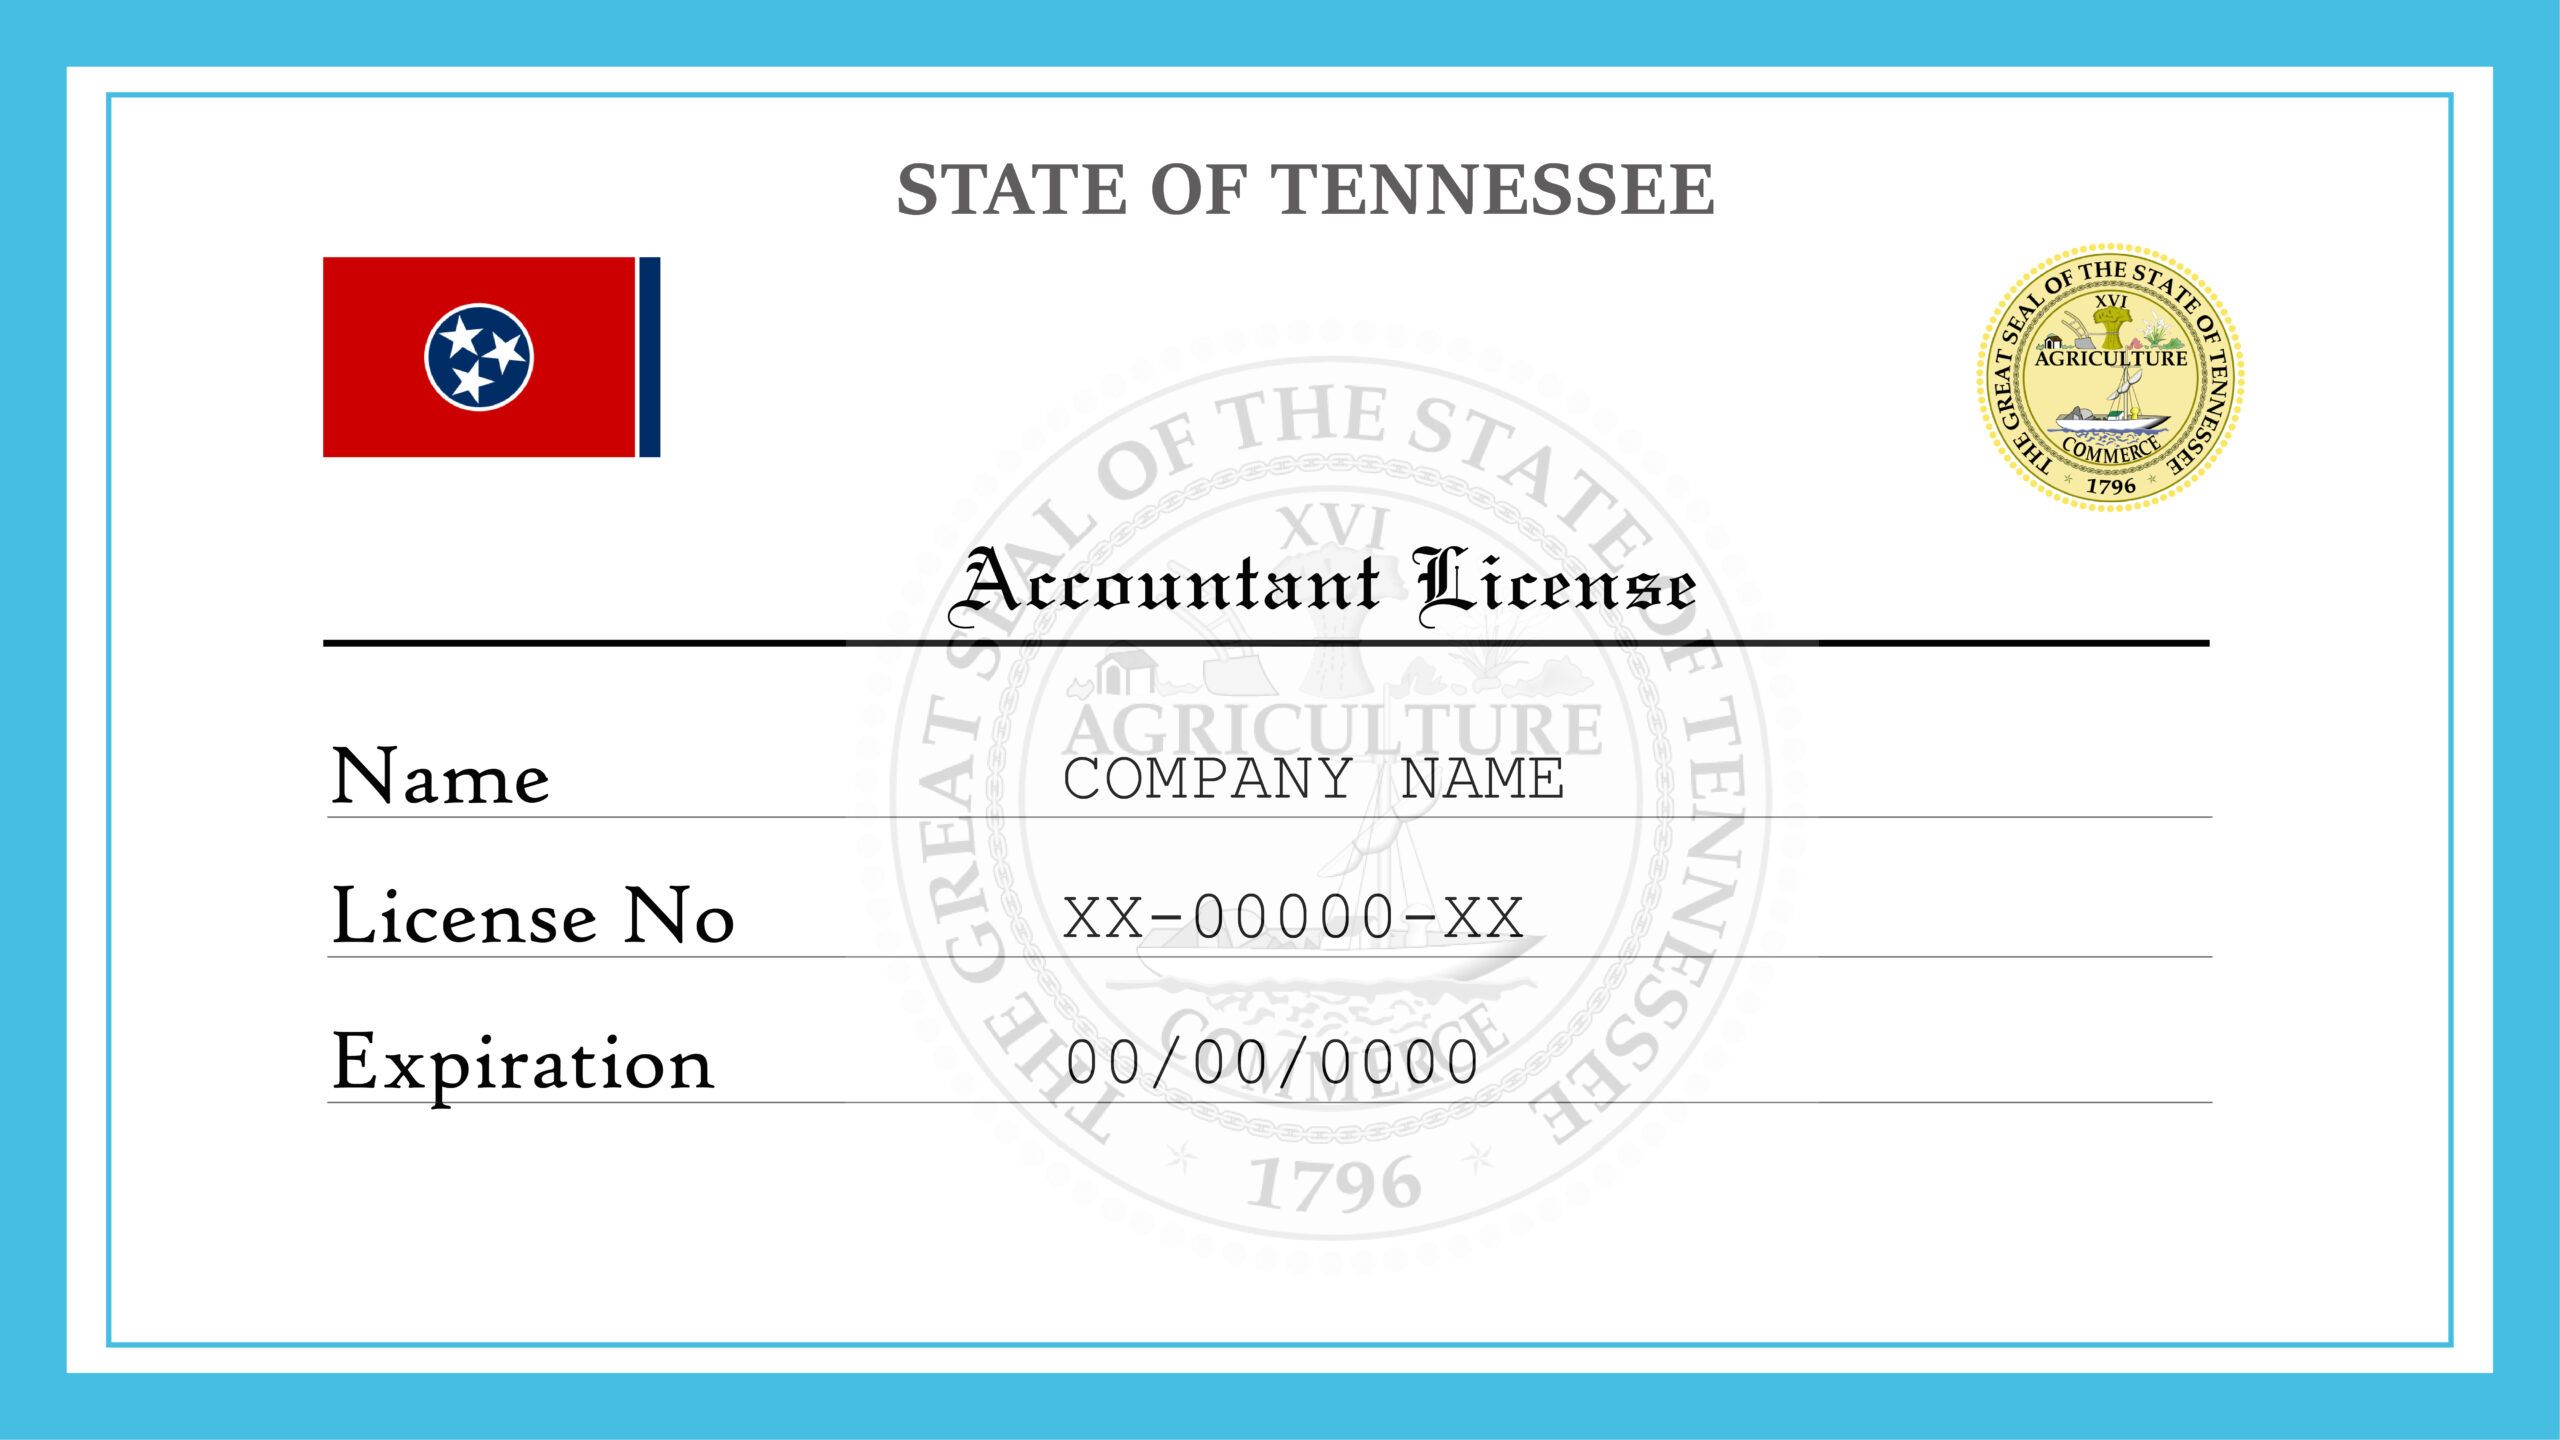 Tennessee License Number Format